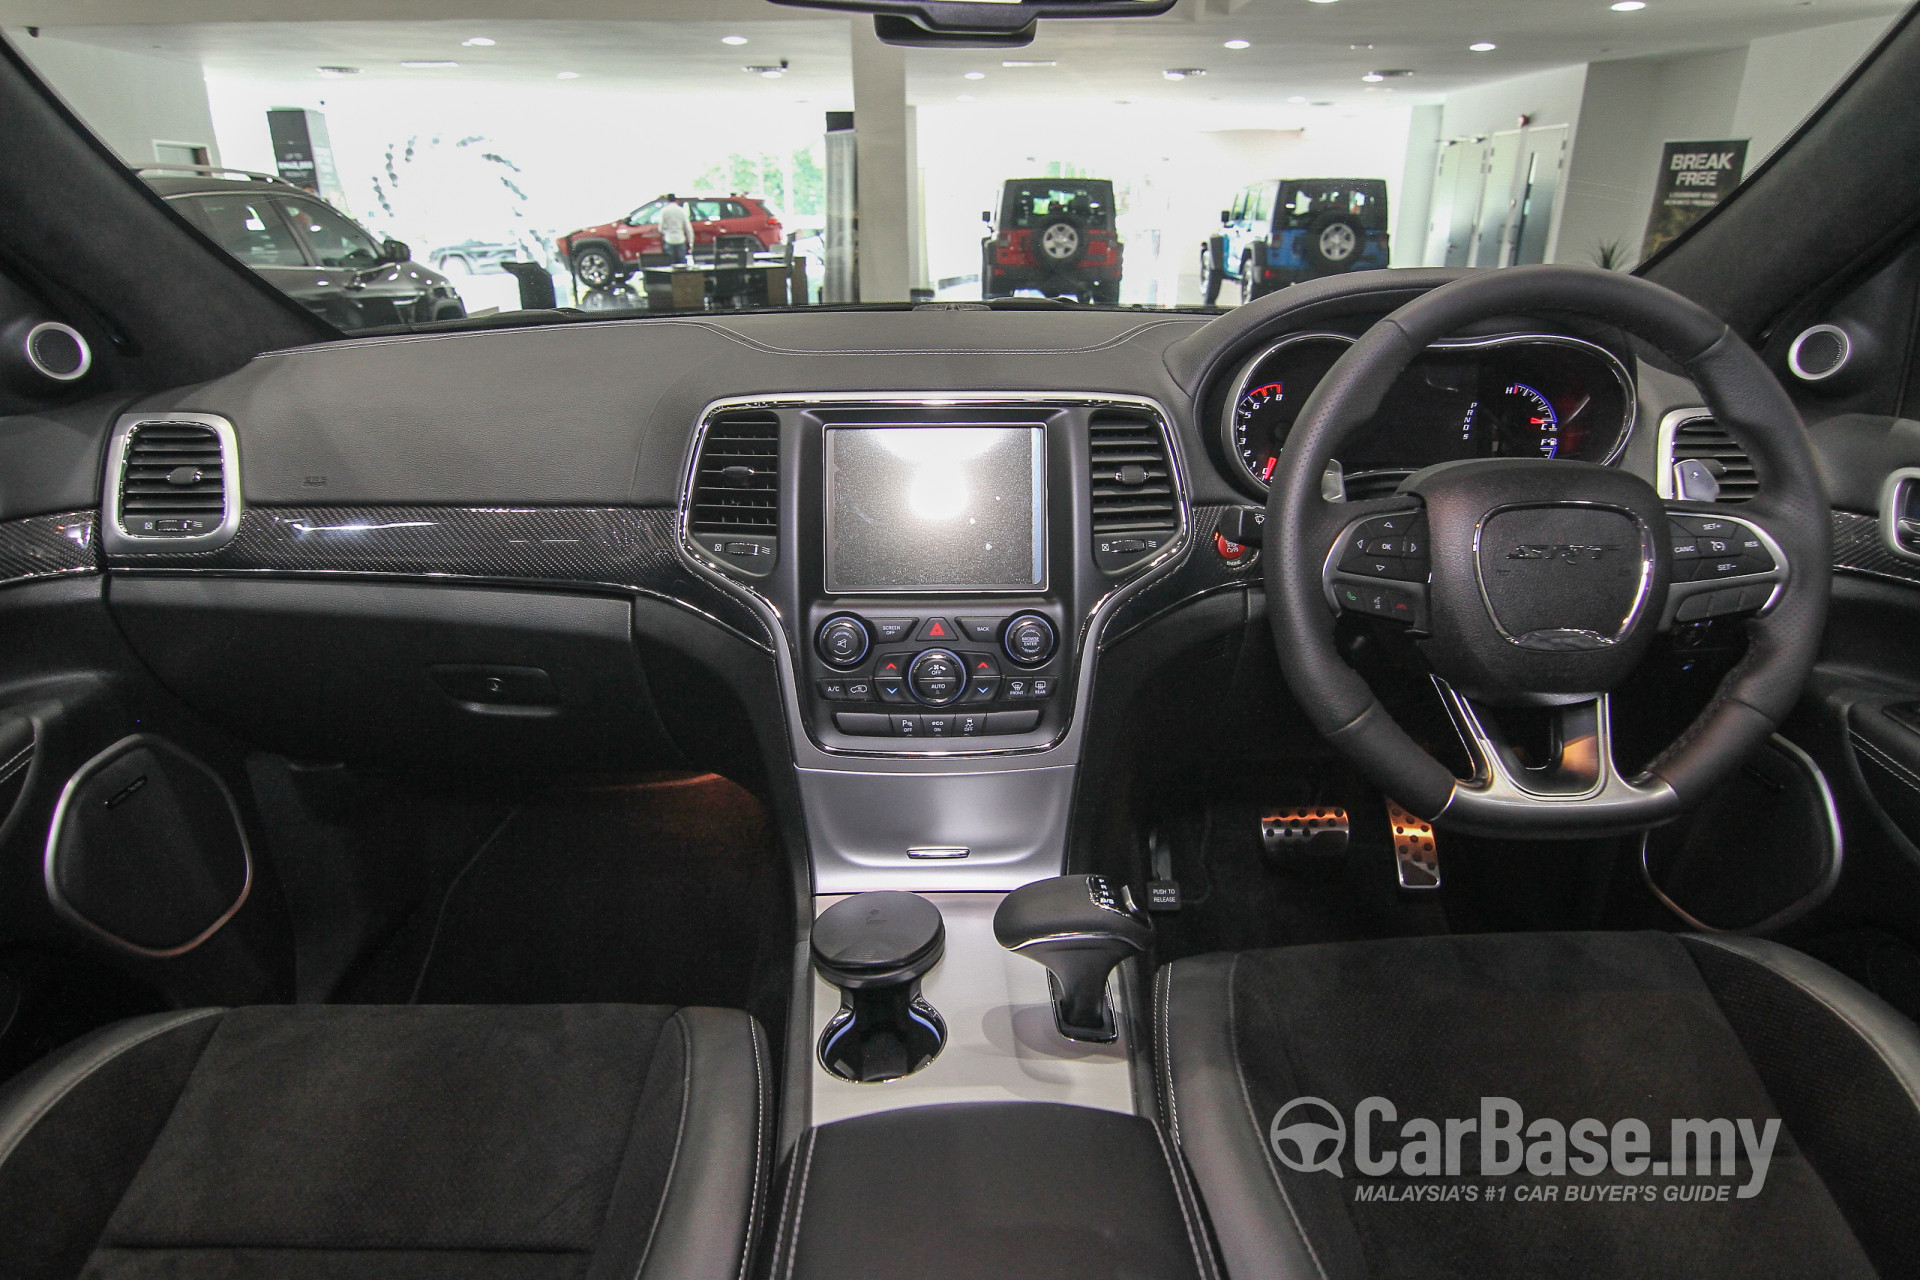 Jeep Grand Cherokee SRT WK2 SRT (2015) Interior Image #21443 in Malaysia - Reviews, Specs